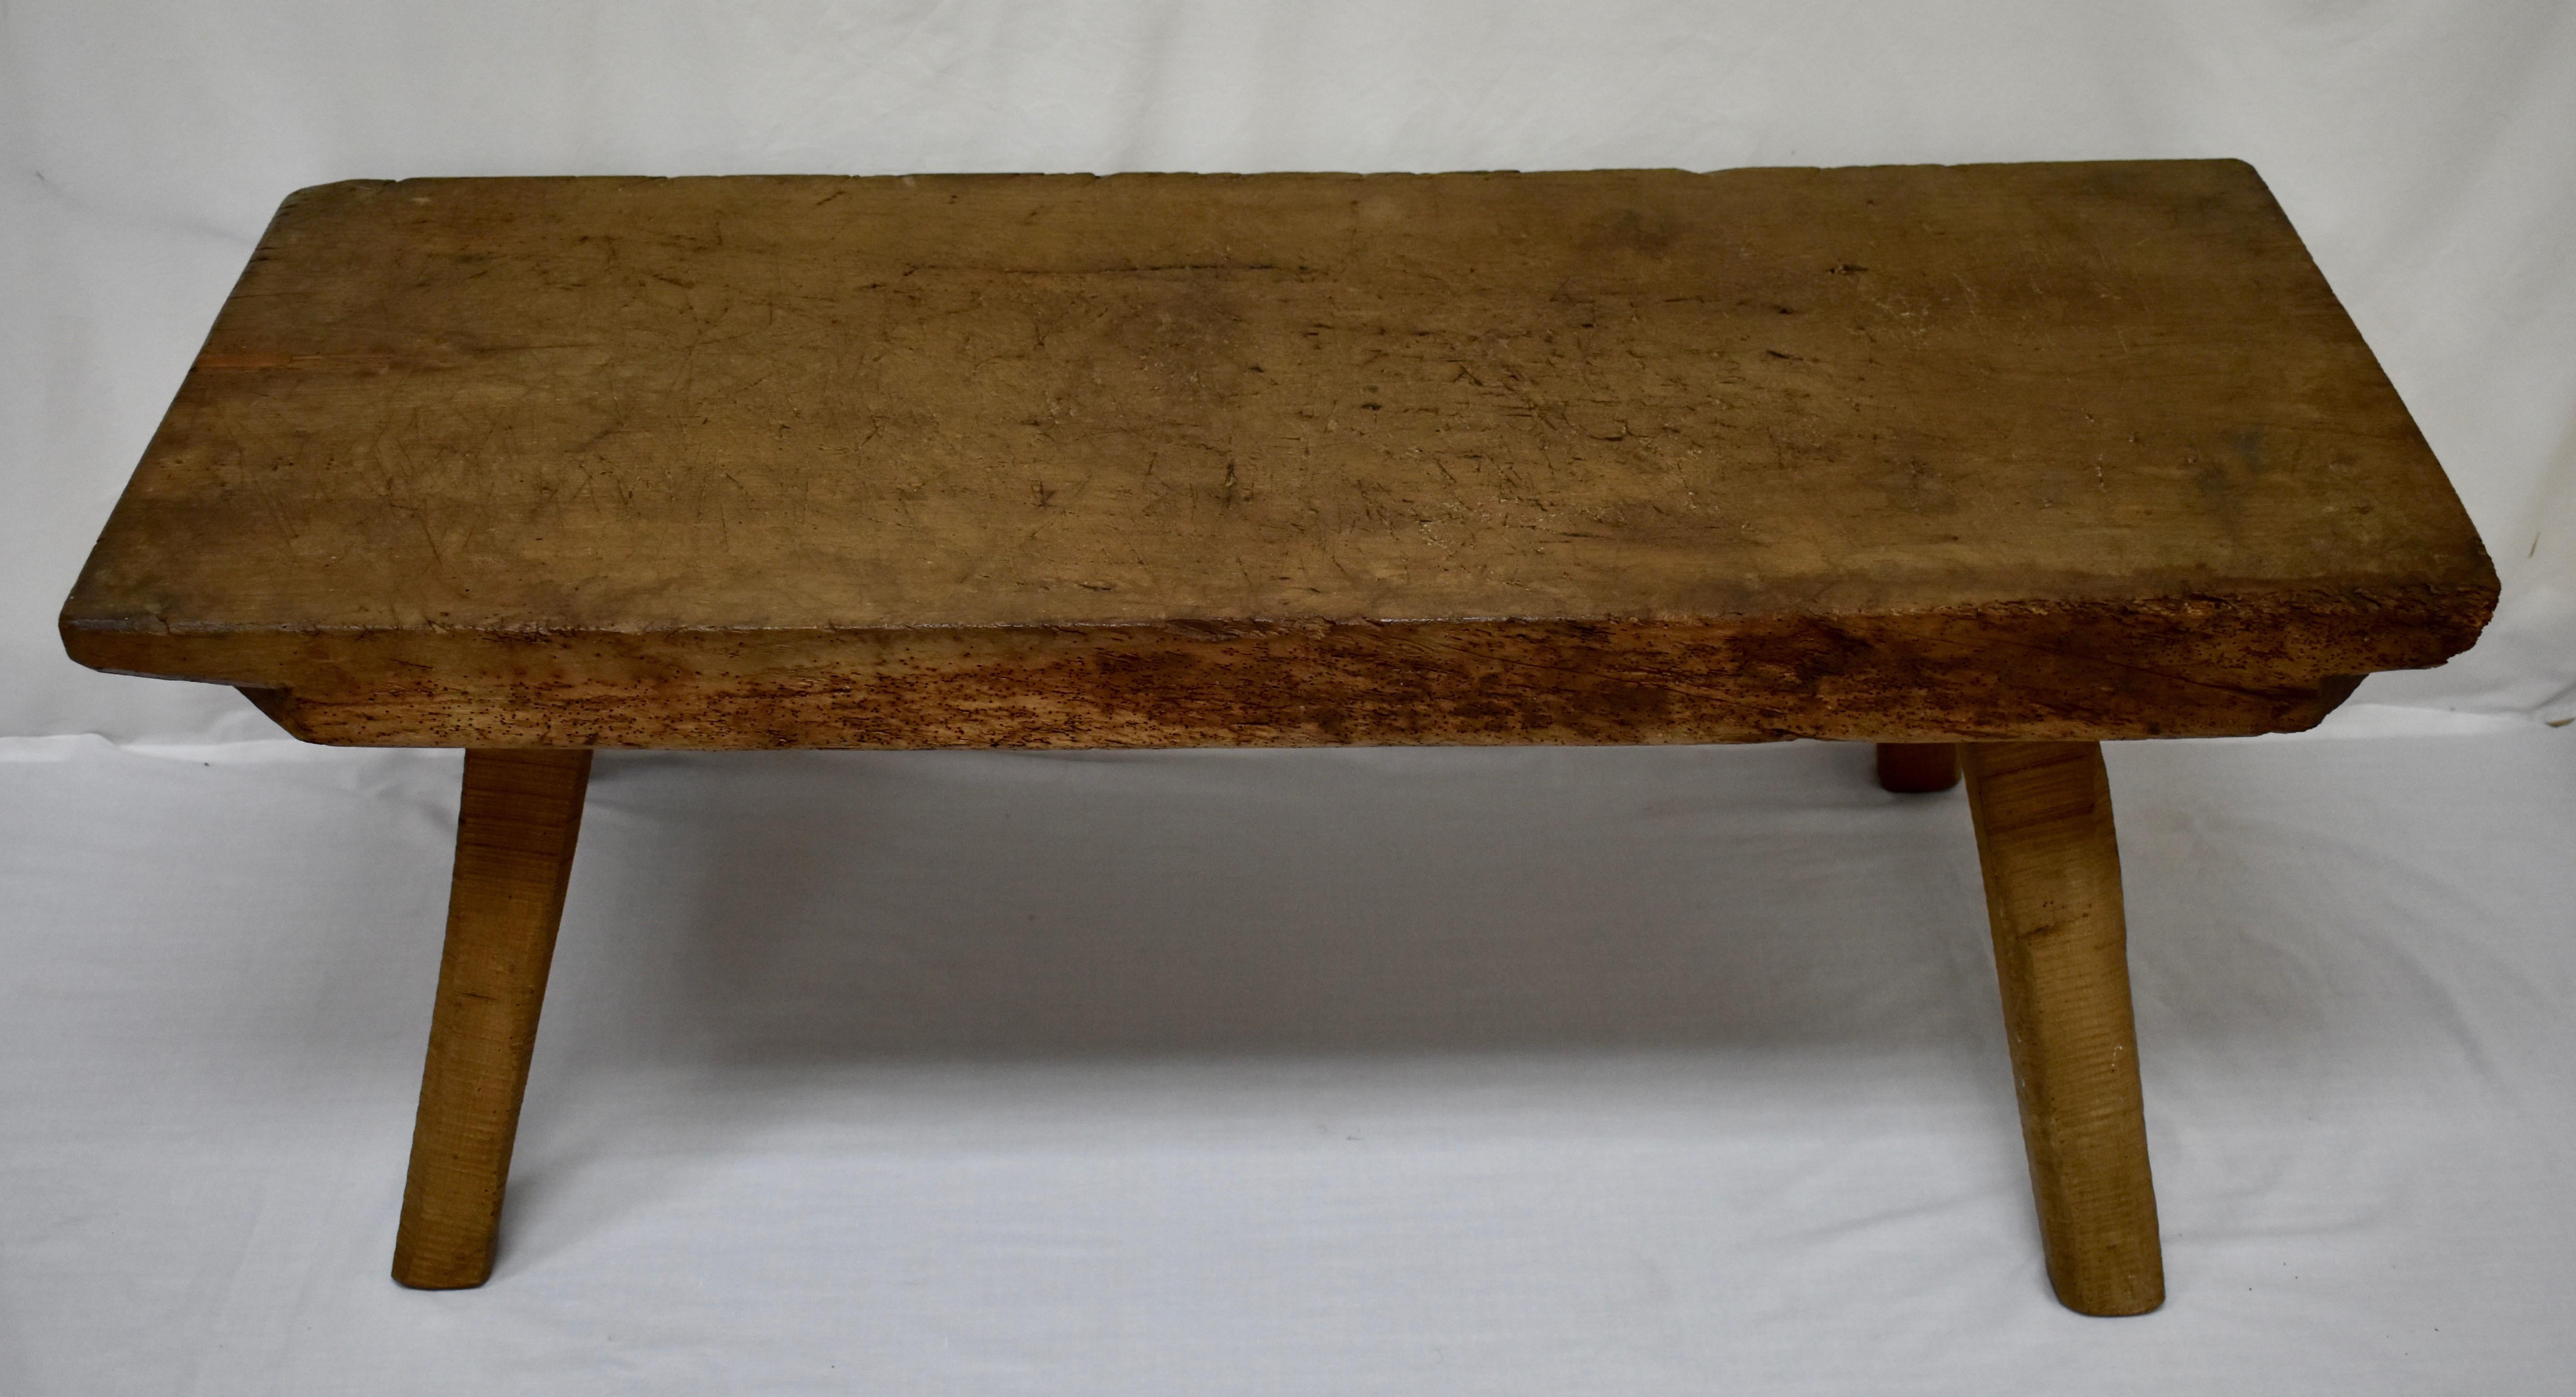 This is another excellent example of an oak pig bench low table. This one stands on four sturdy hand-sawn splayed legs which are mortised into the underside of the top. The top itself is a single slab of oak almost 4” thick, which has the underside